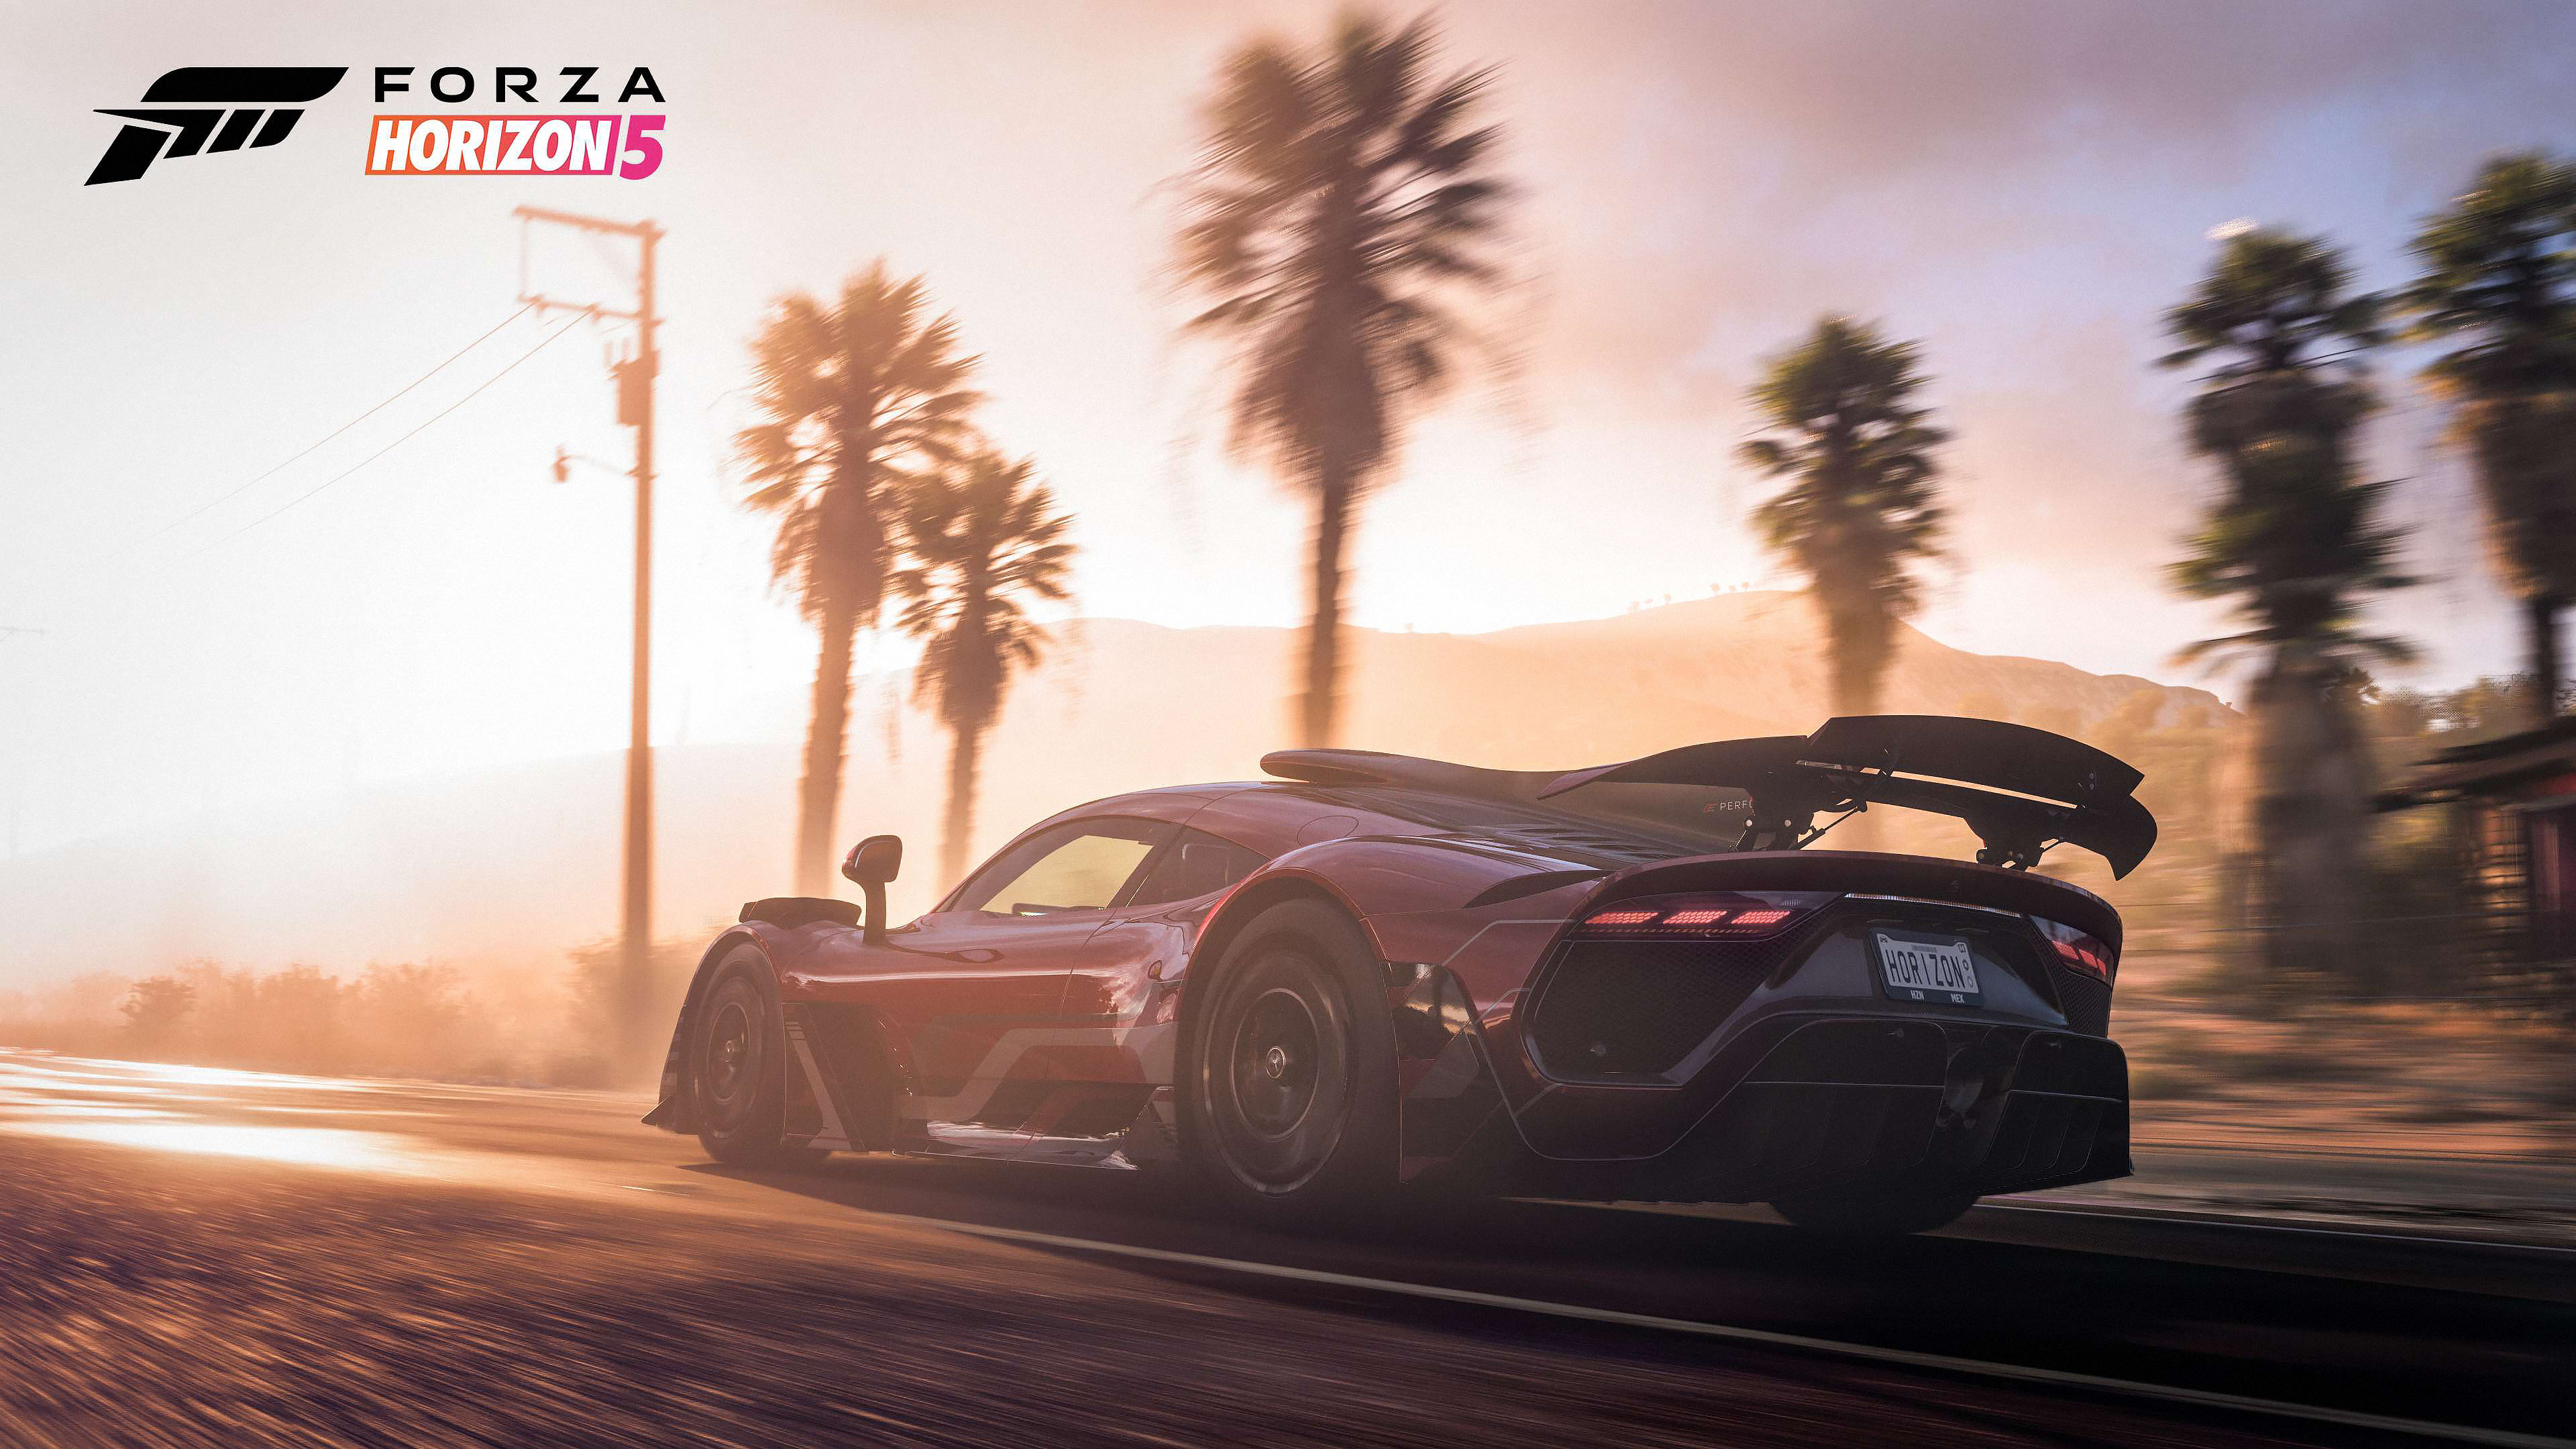 Forza Horizon 5 Mercedes AMG Project ONE Sunset Mexico Video Games Car Racing Vehicle 3840x2160